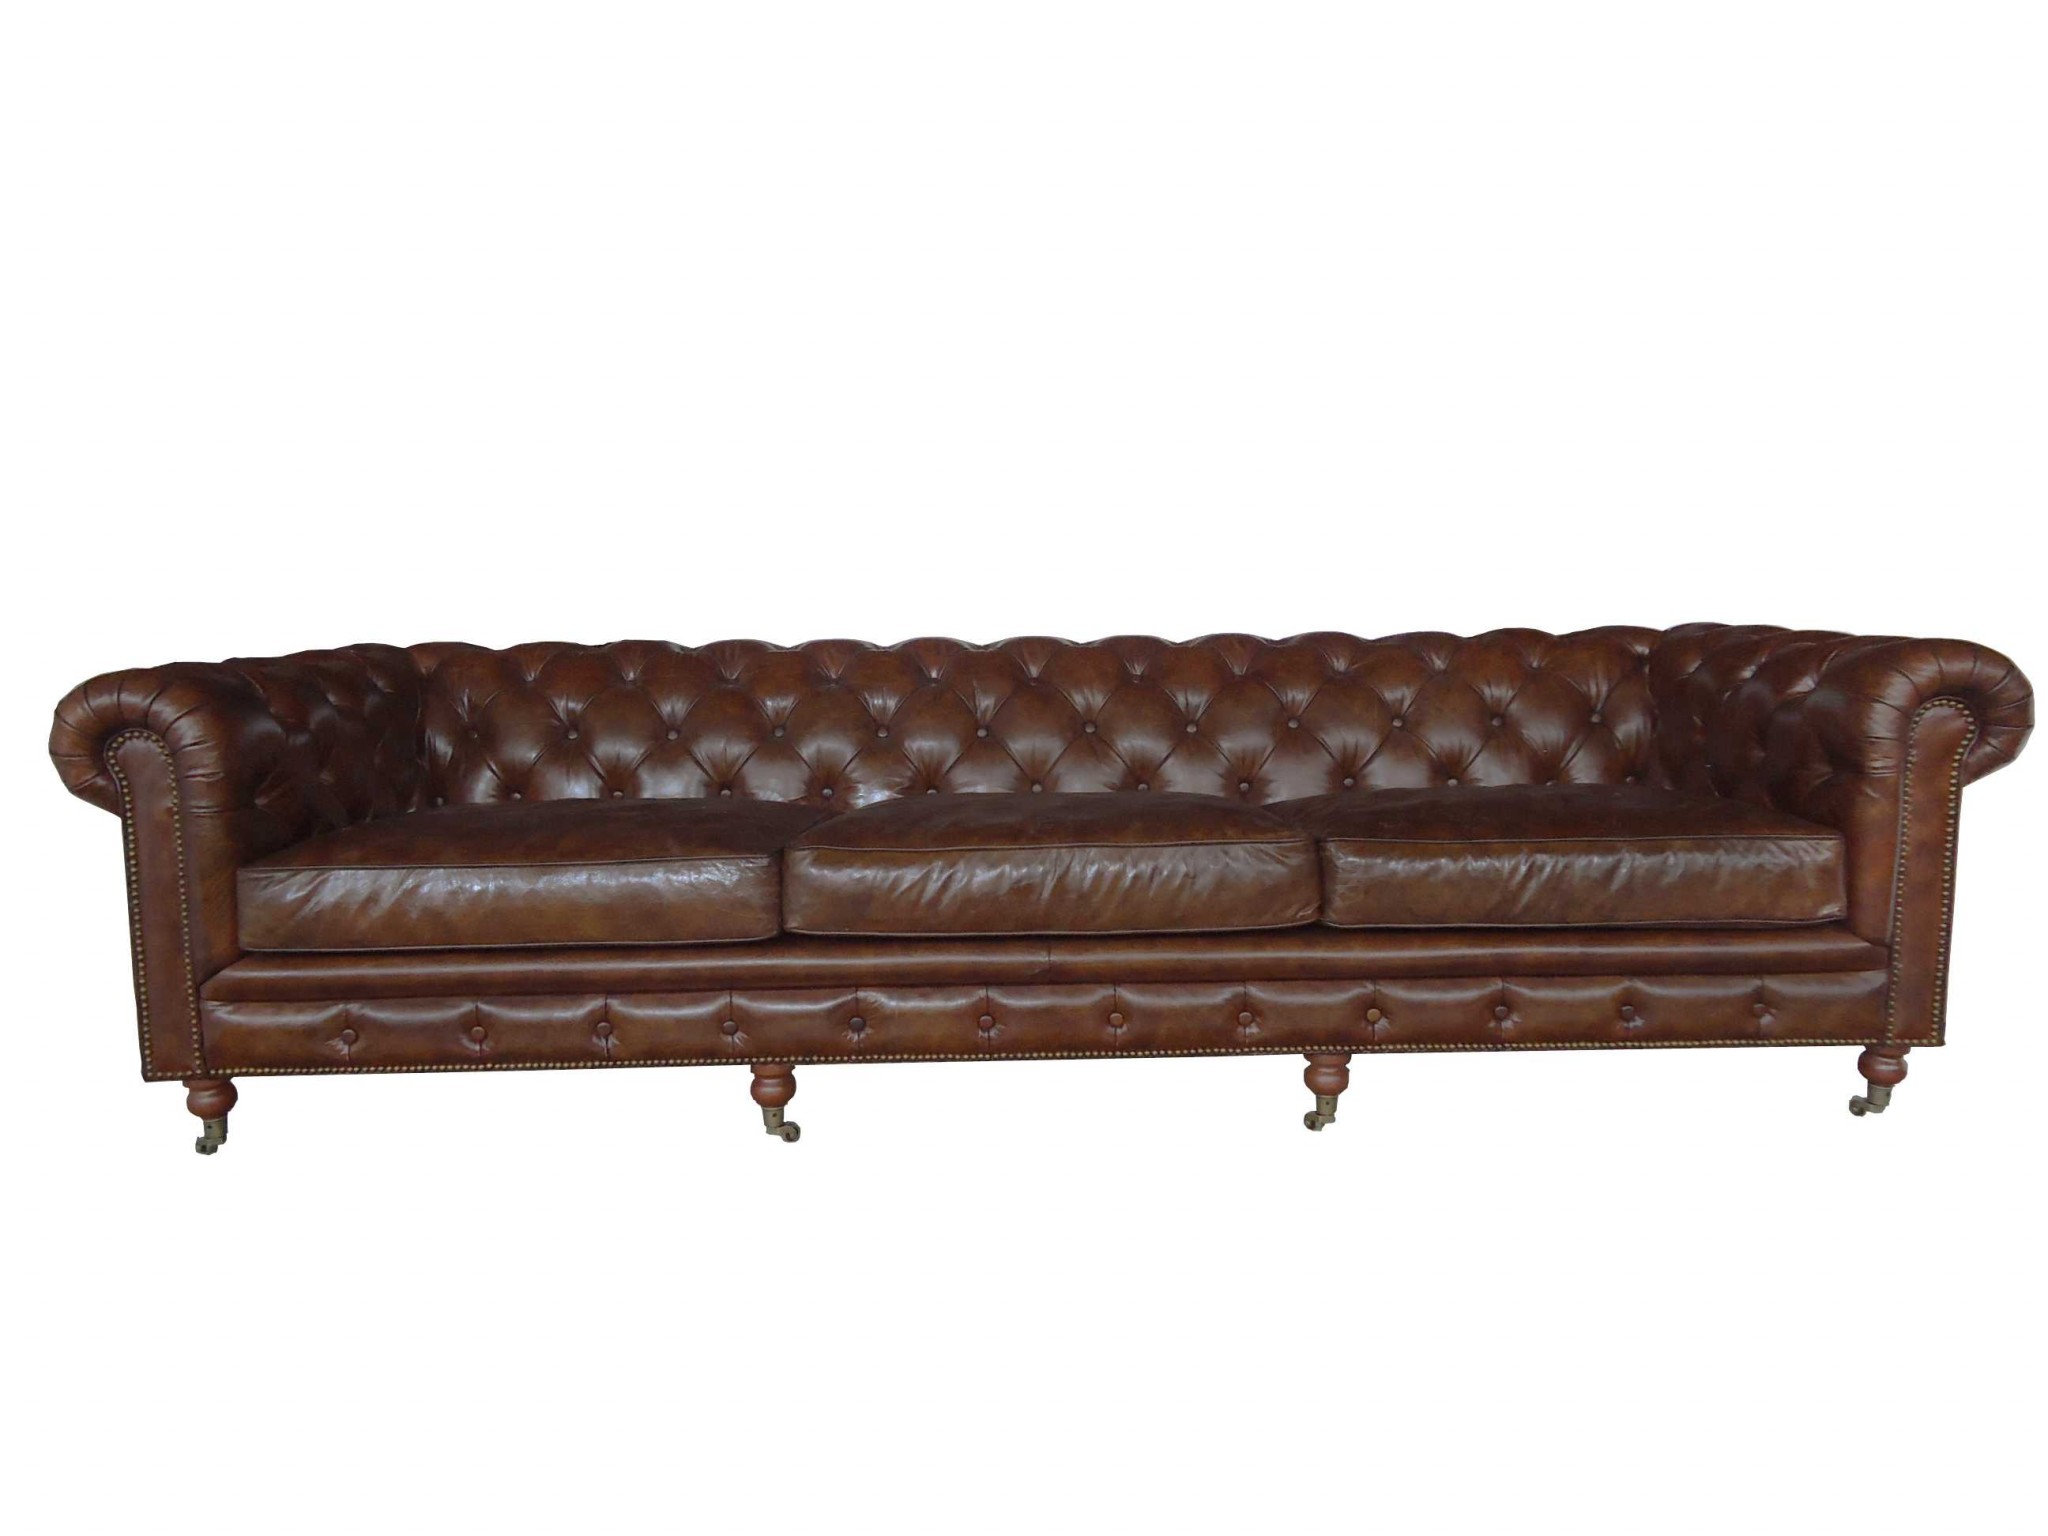 36" X 118" X 30" Brown Leather Sofa 4 Places